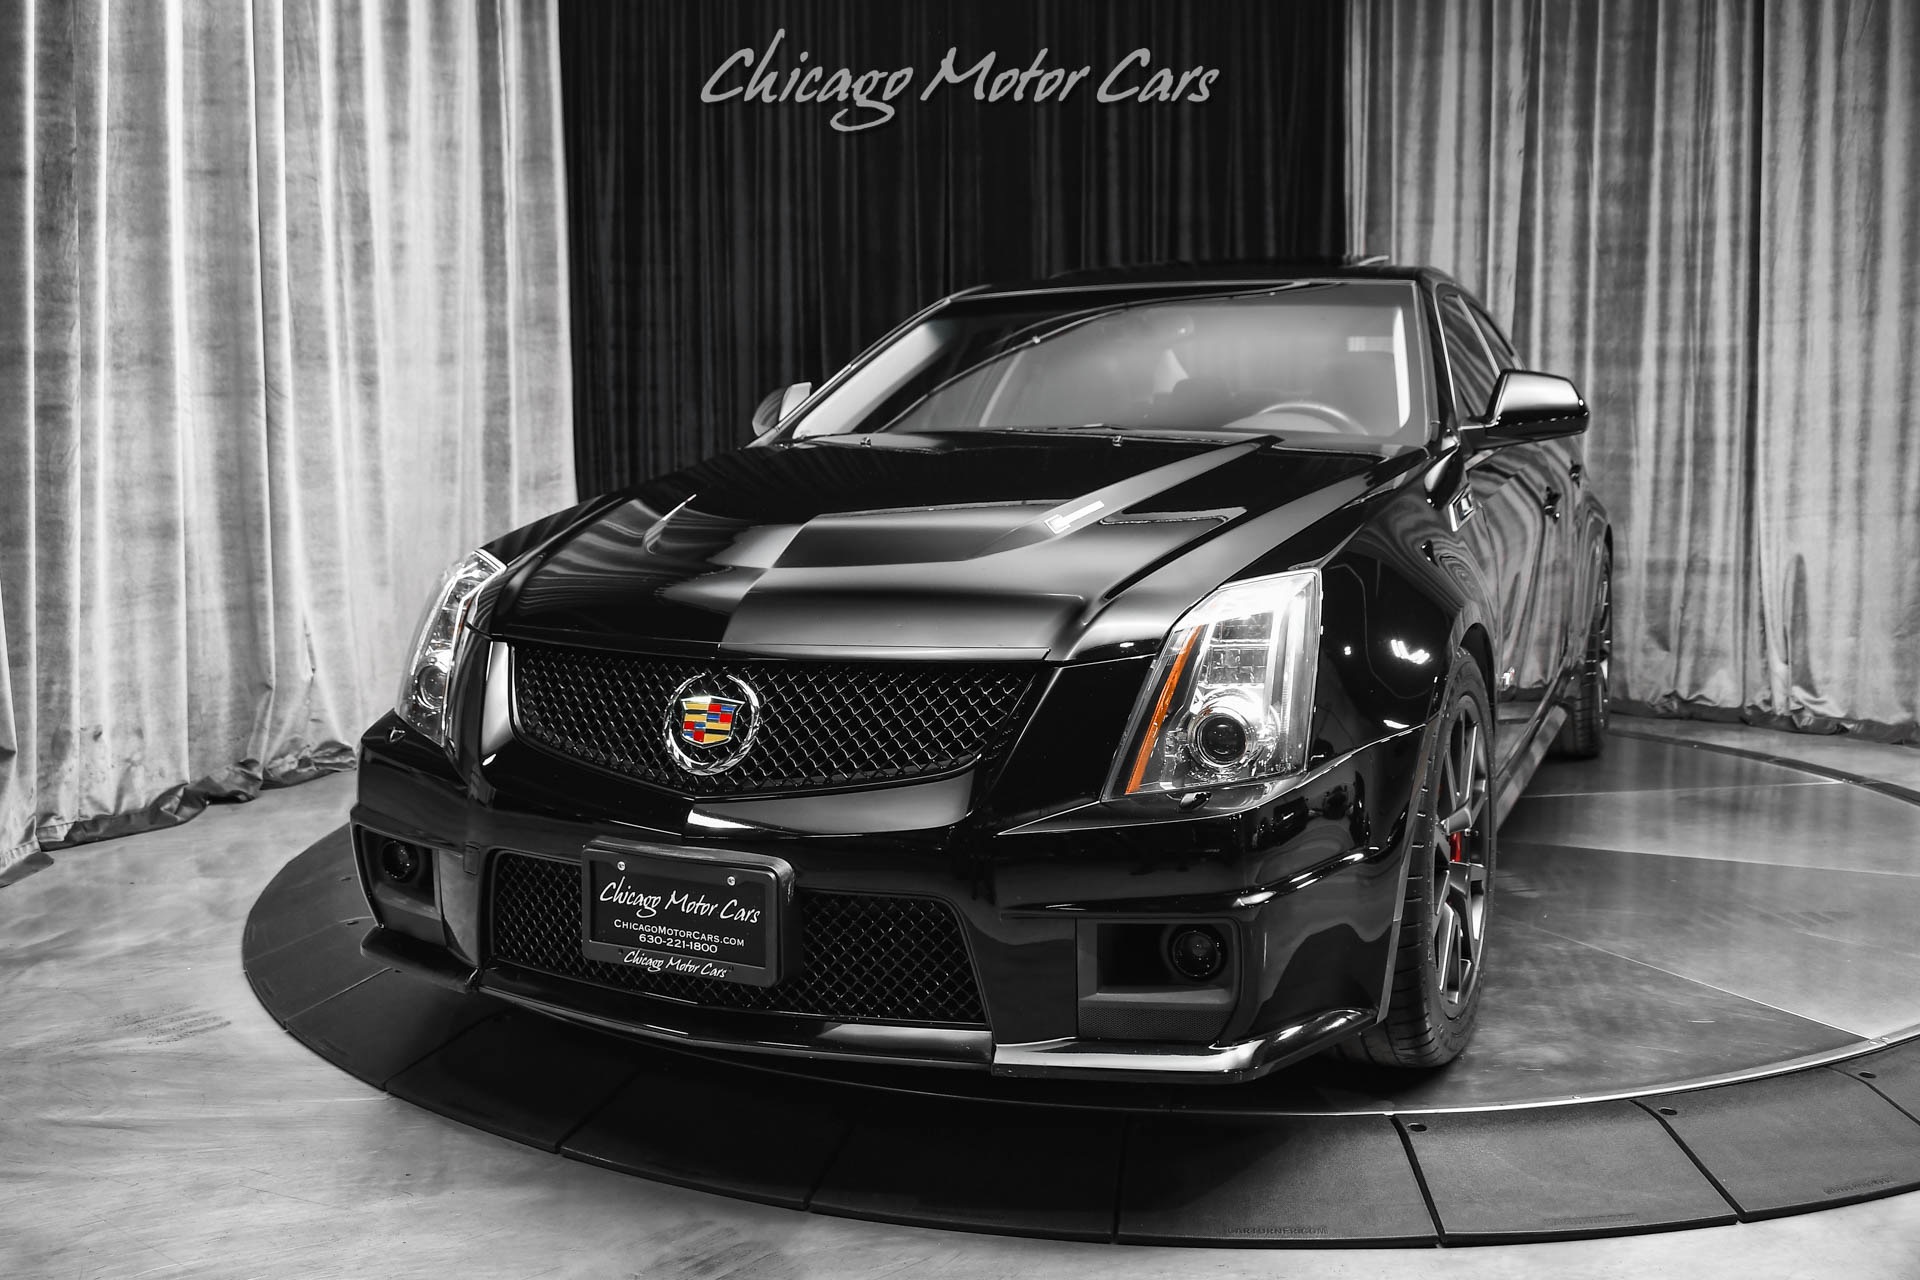 Used-2014-Cadillac-CTS-V-Low-Mileage-556HP-Ultraview-Sunroof